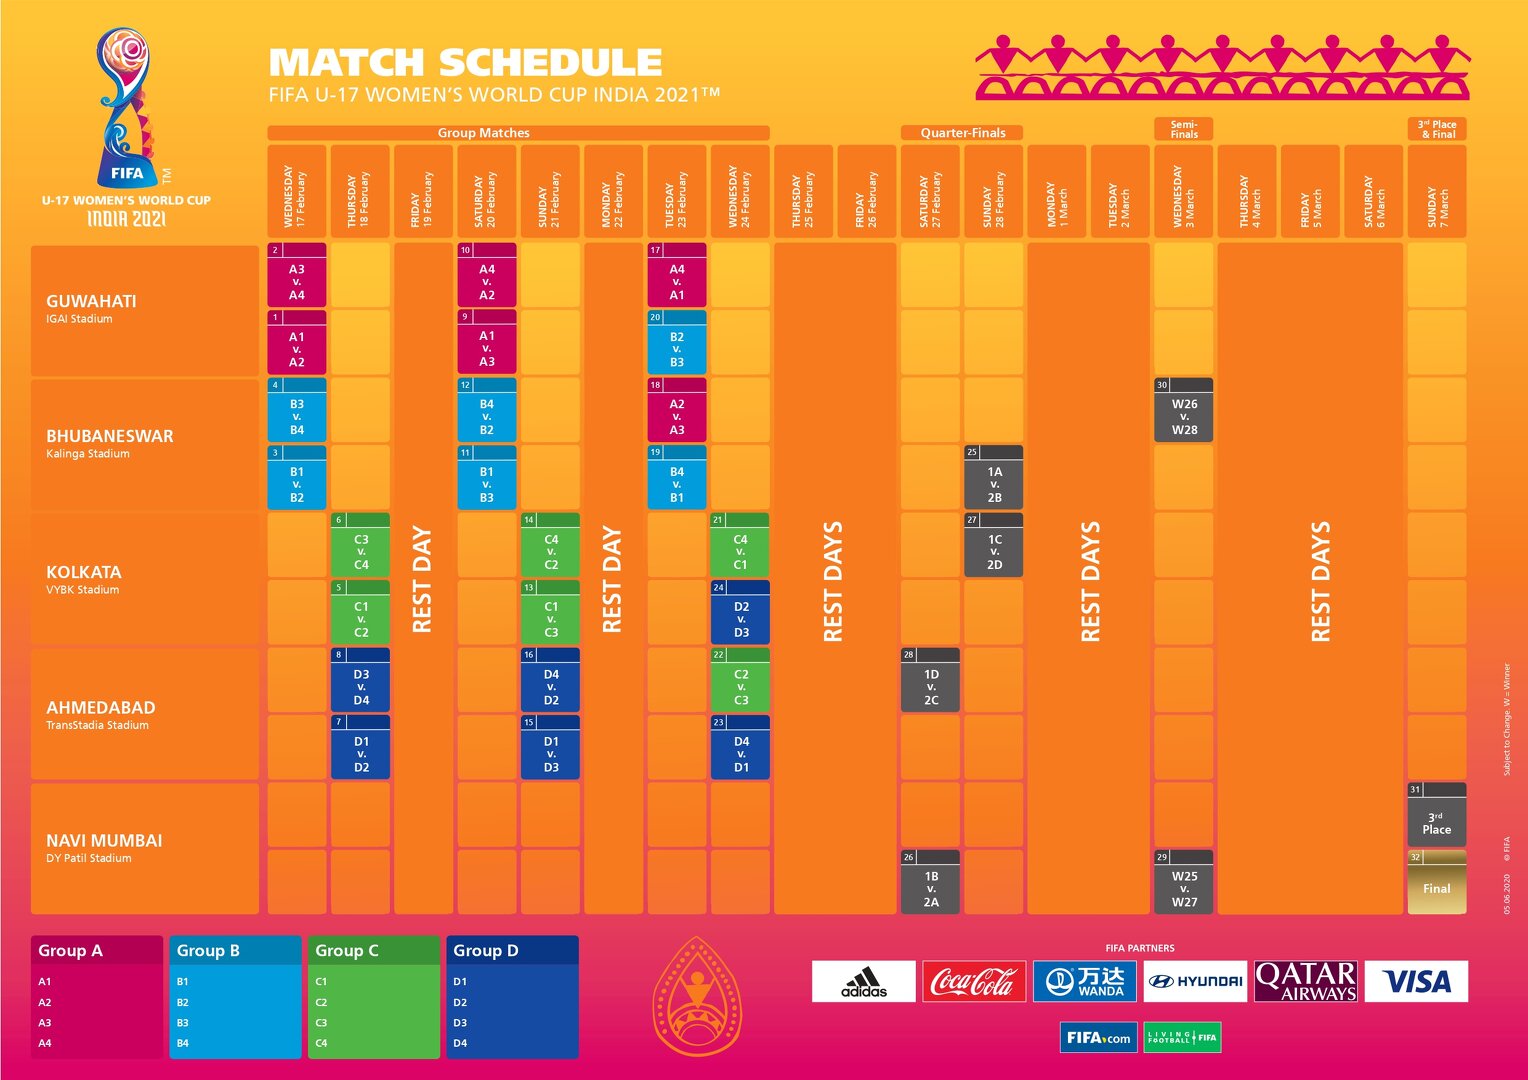 FIFA releases revised schedule of U17 Women's World Cup